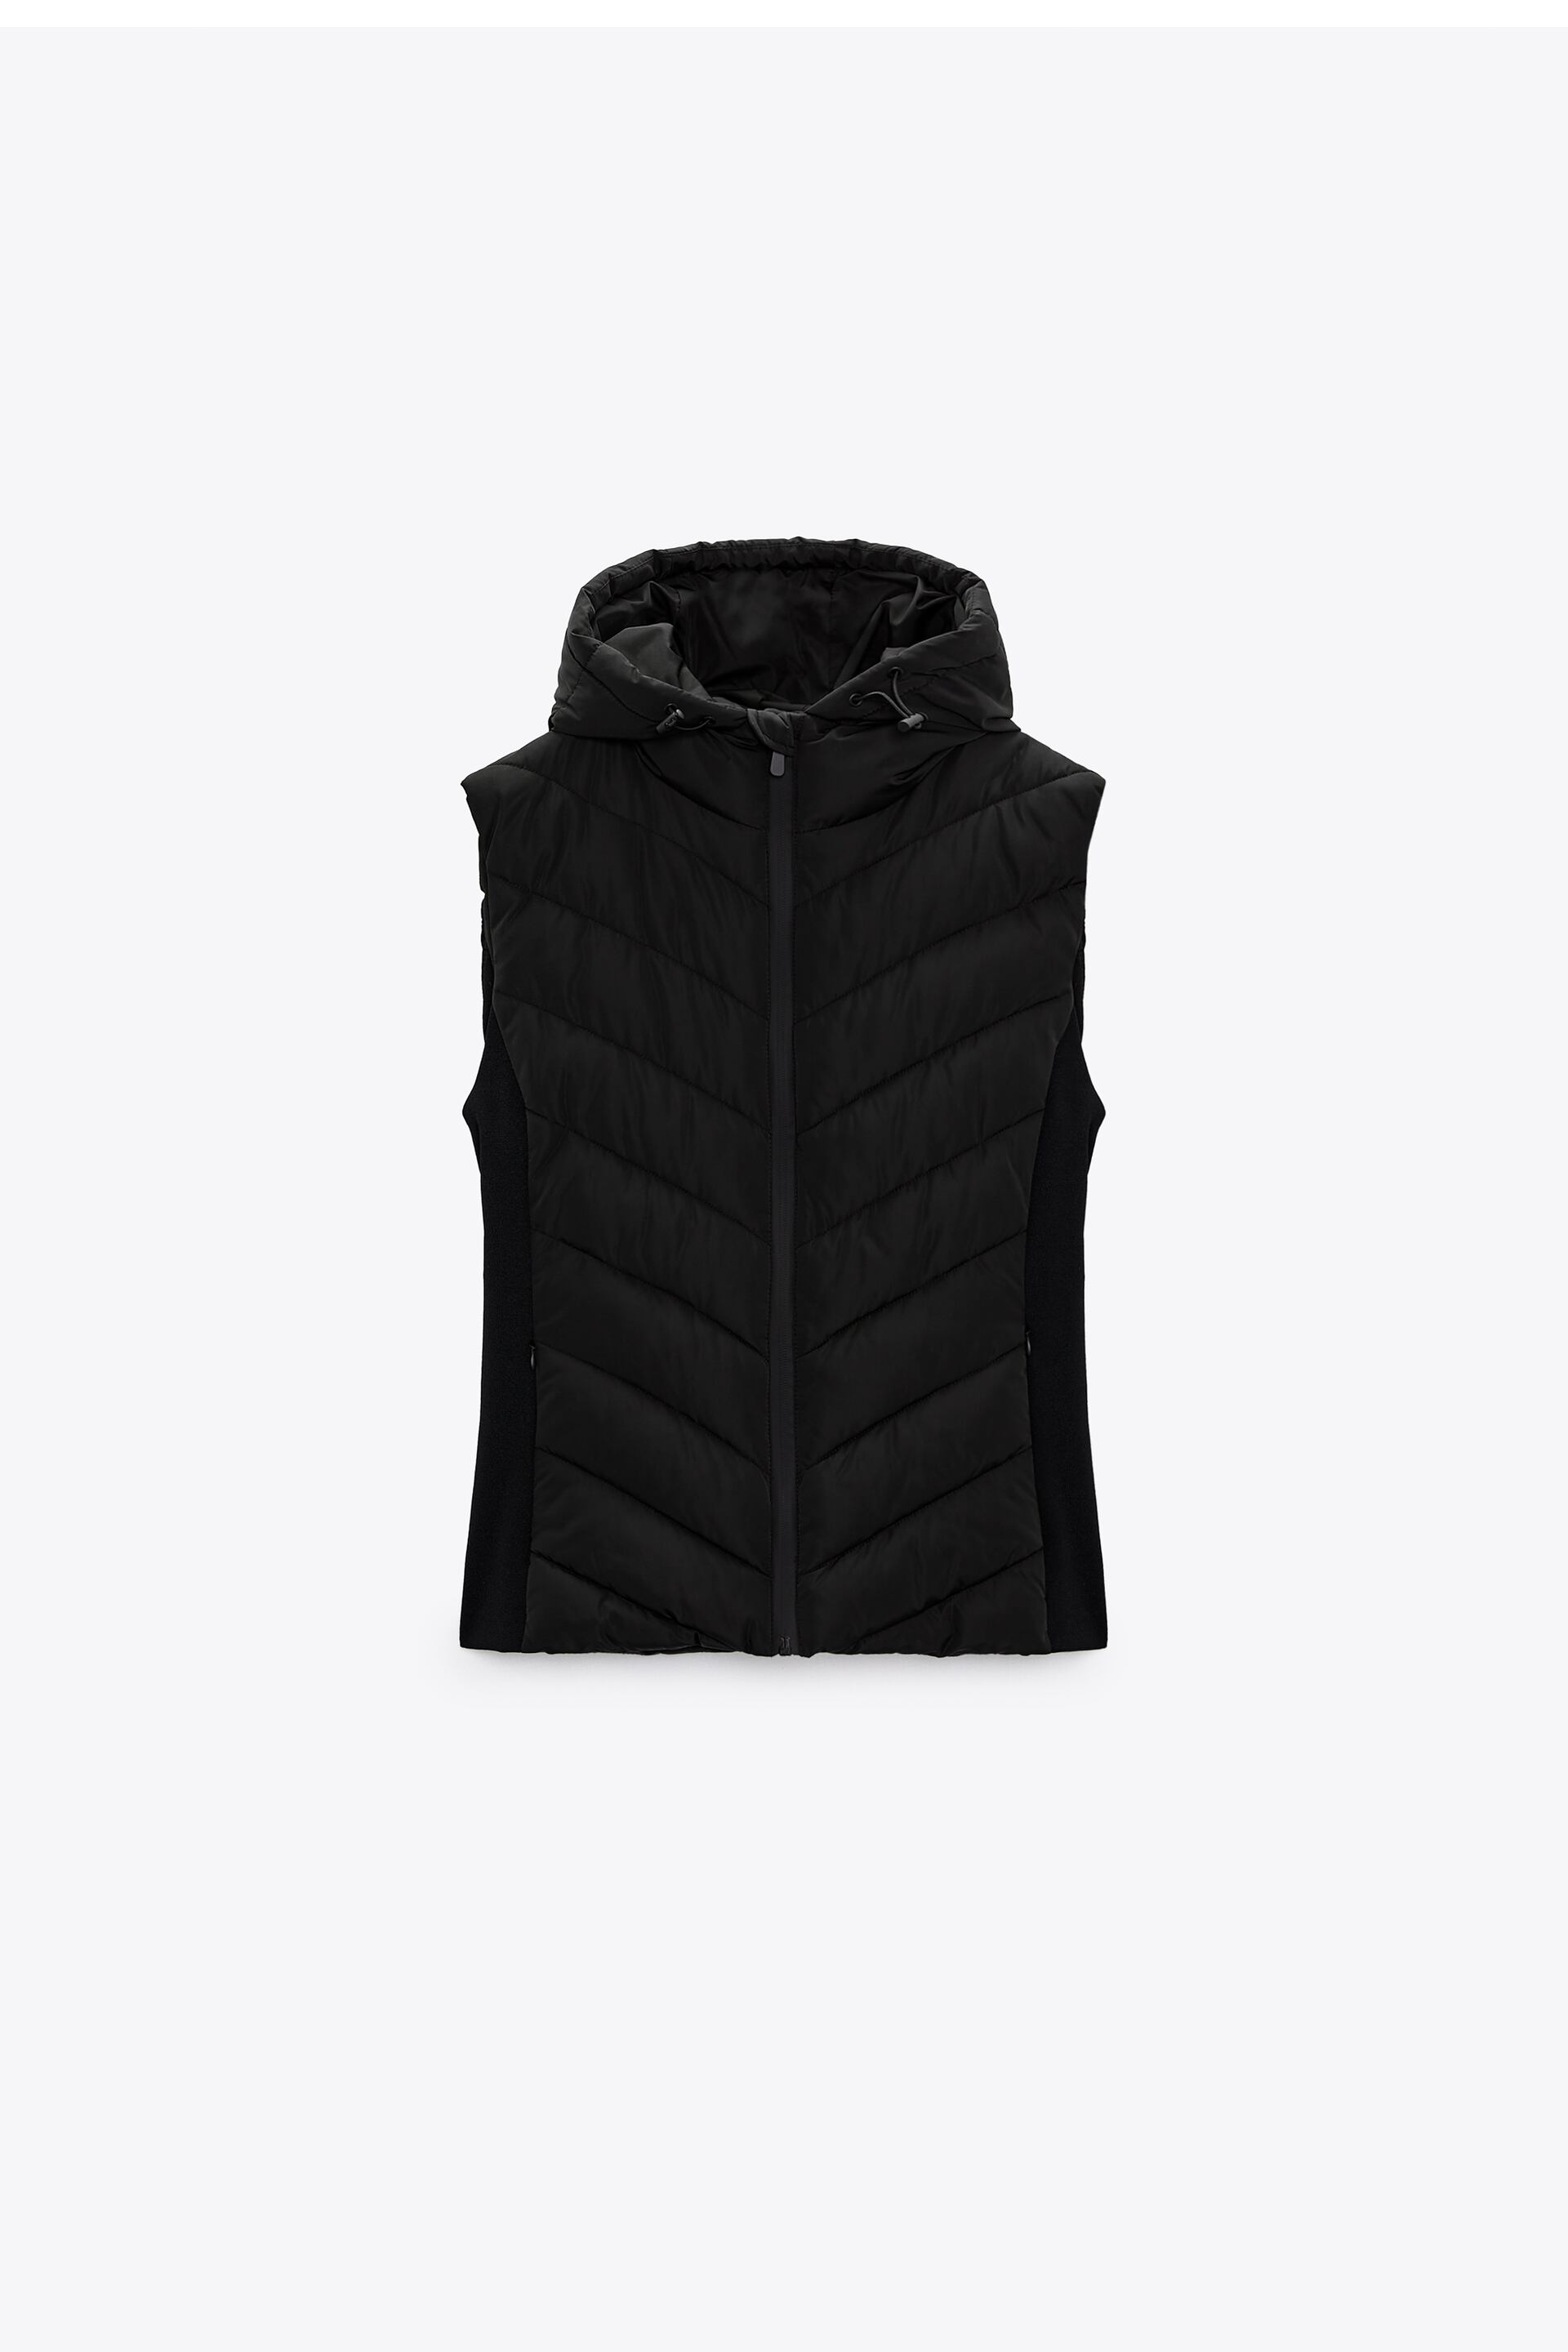 Zara FITTED HOODED PUFFER VEST - 177657374-800-